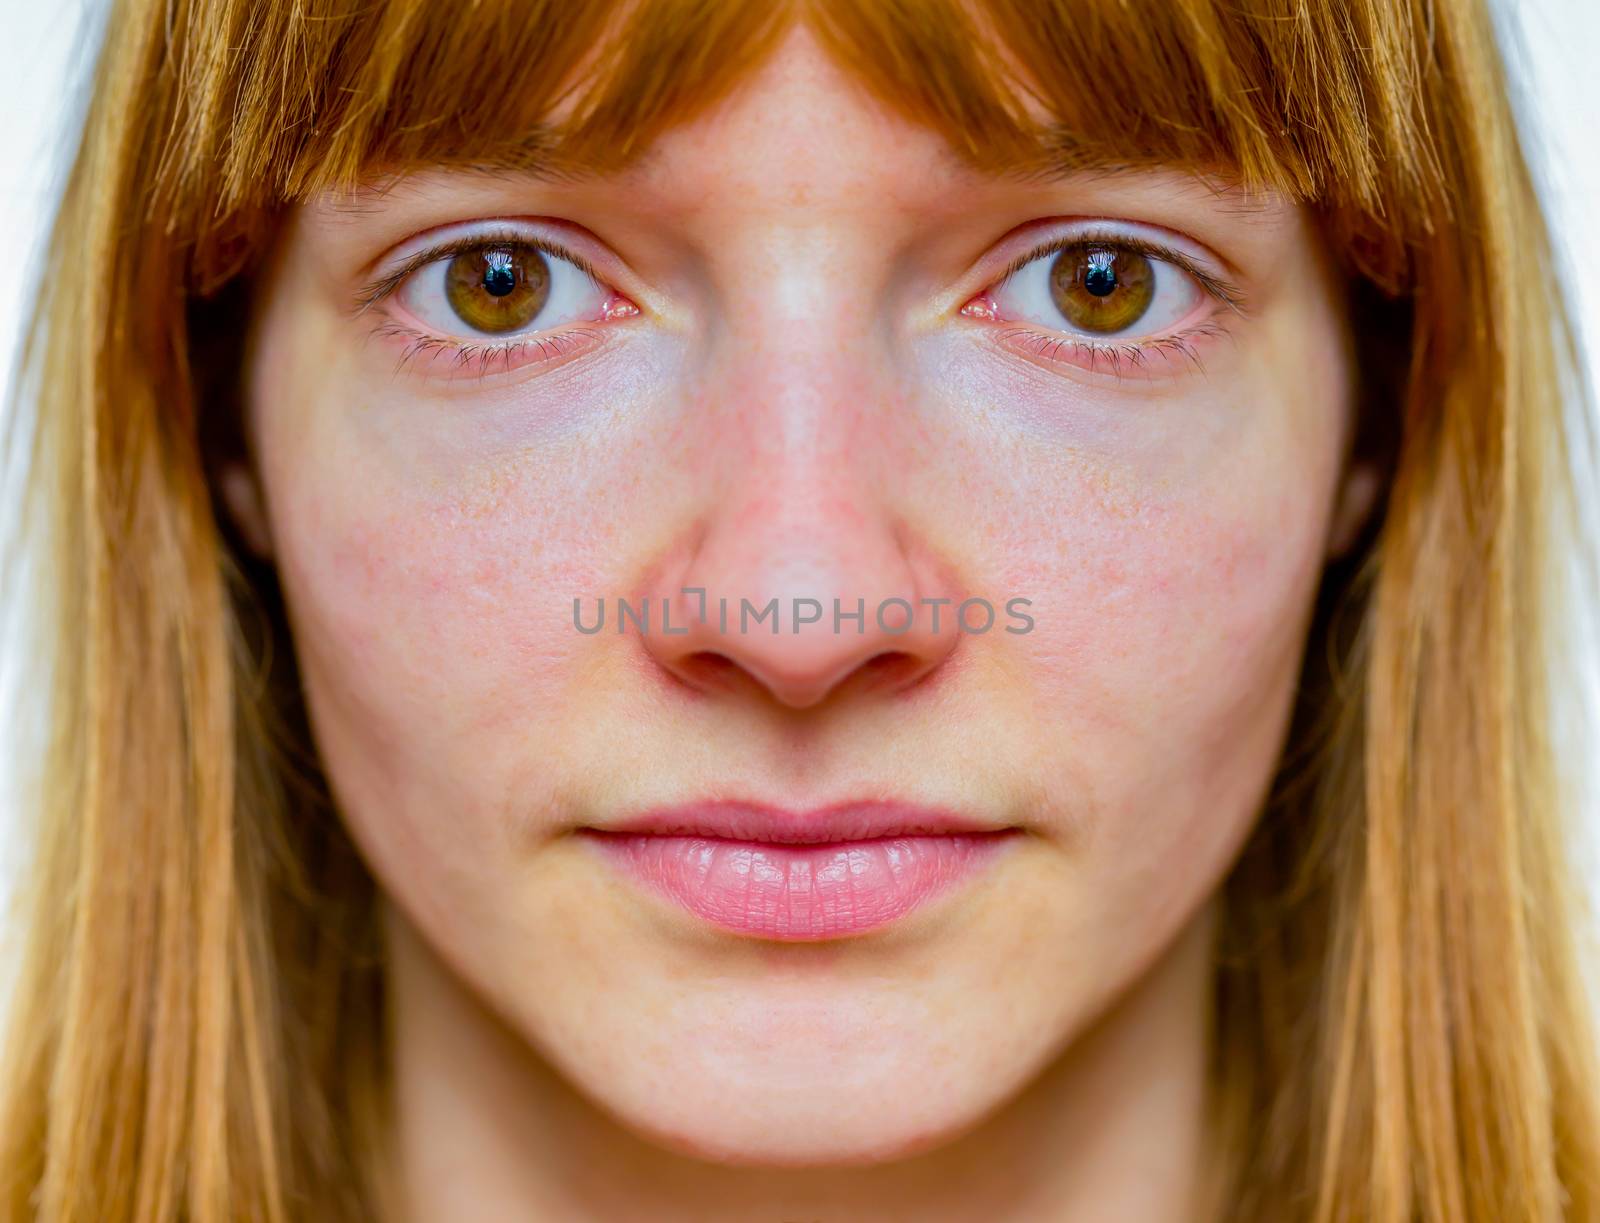 Symmetric face of teenage girl by BenSchonewille